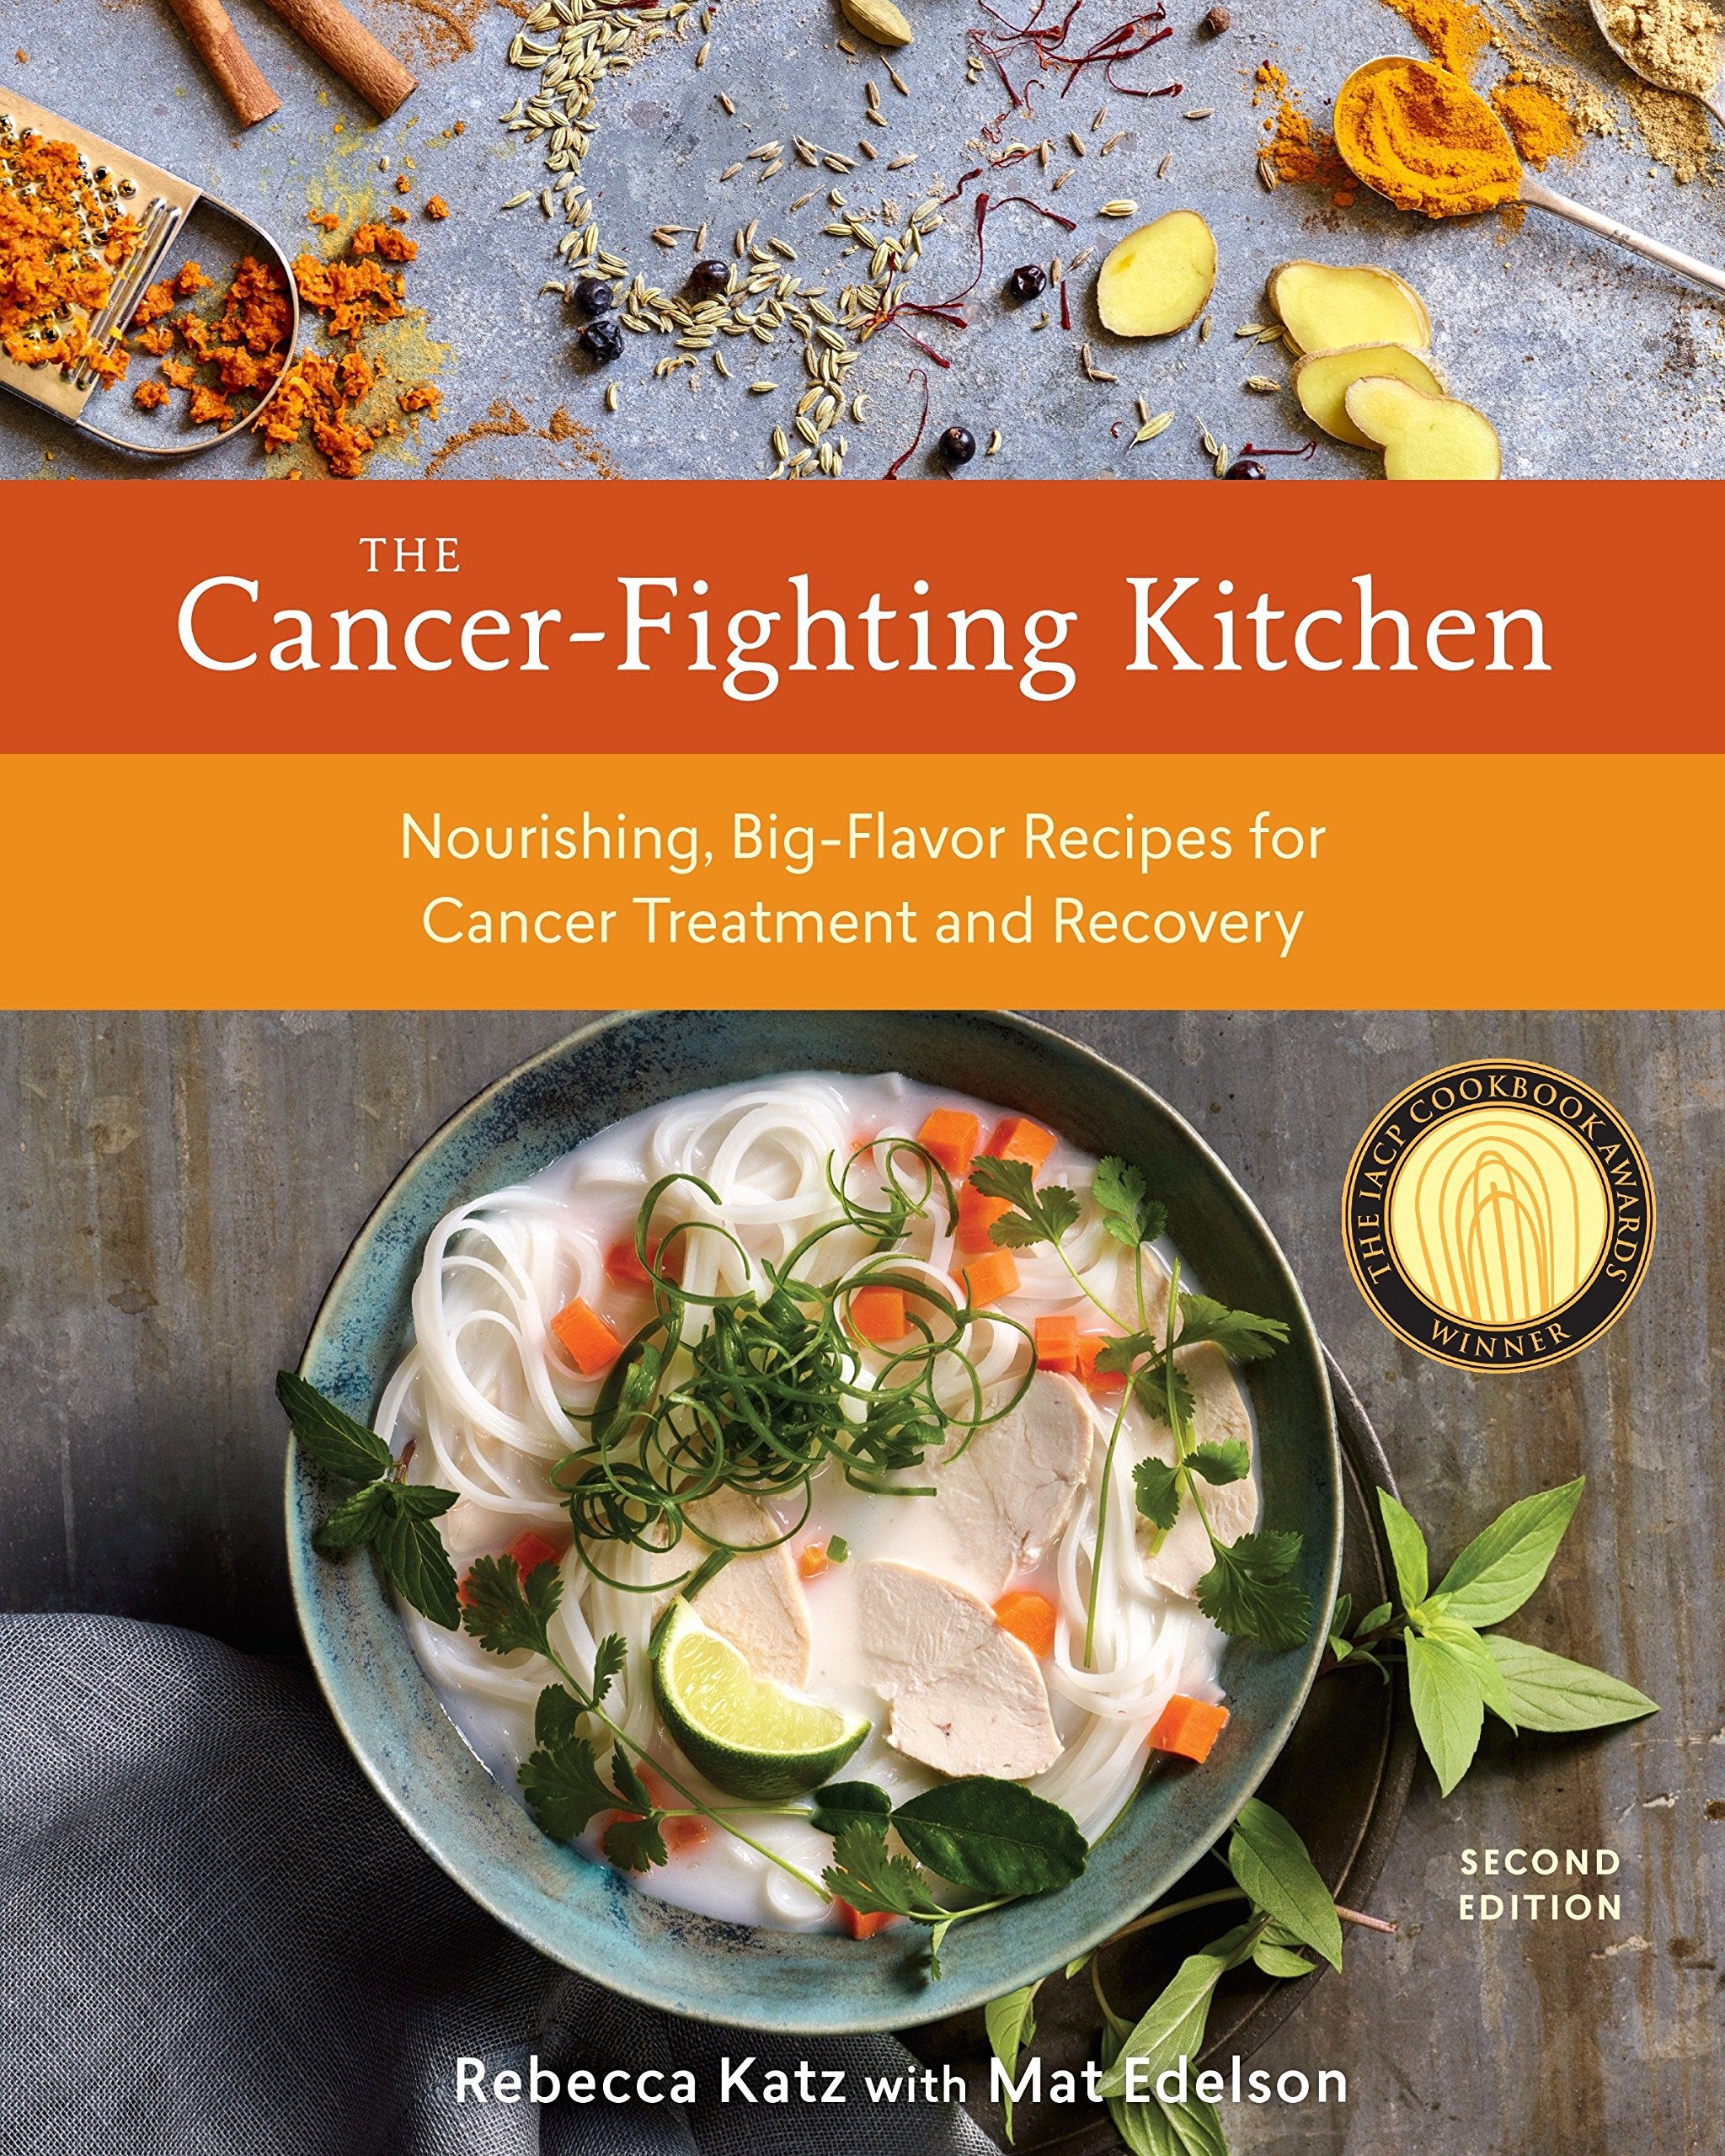 The Cancer-Fighting Kitchen, Second Edition: Nourishing, Big-Flavor Recipes for Cancer Treatment and Recovery (Rebecca Katz)